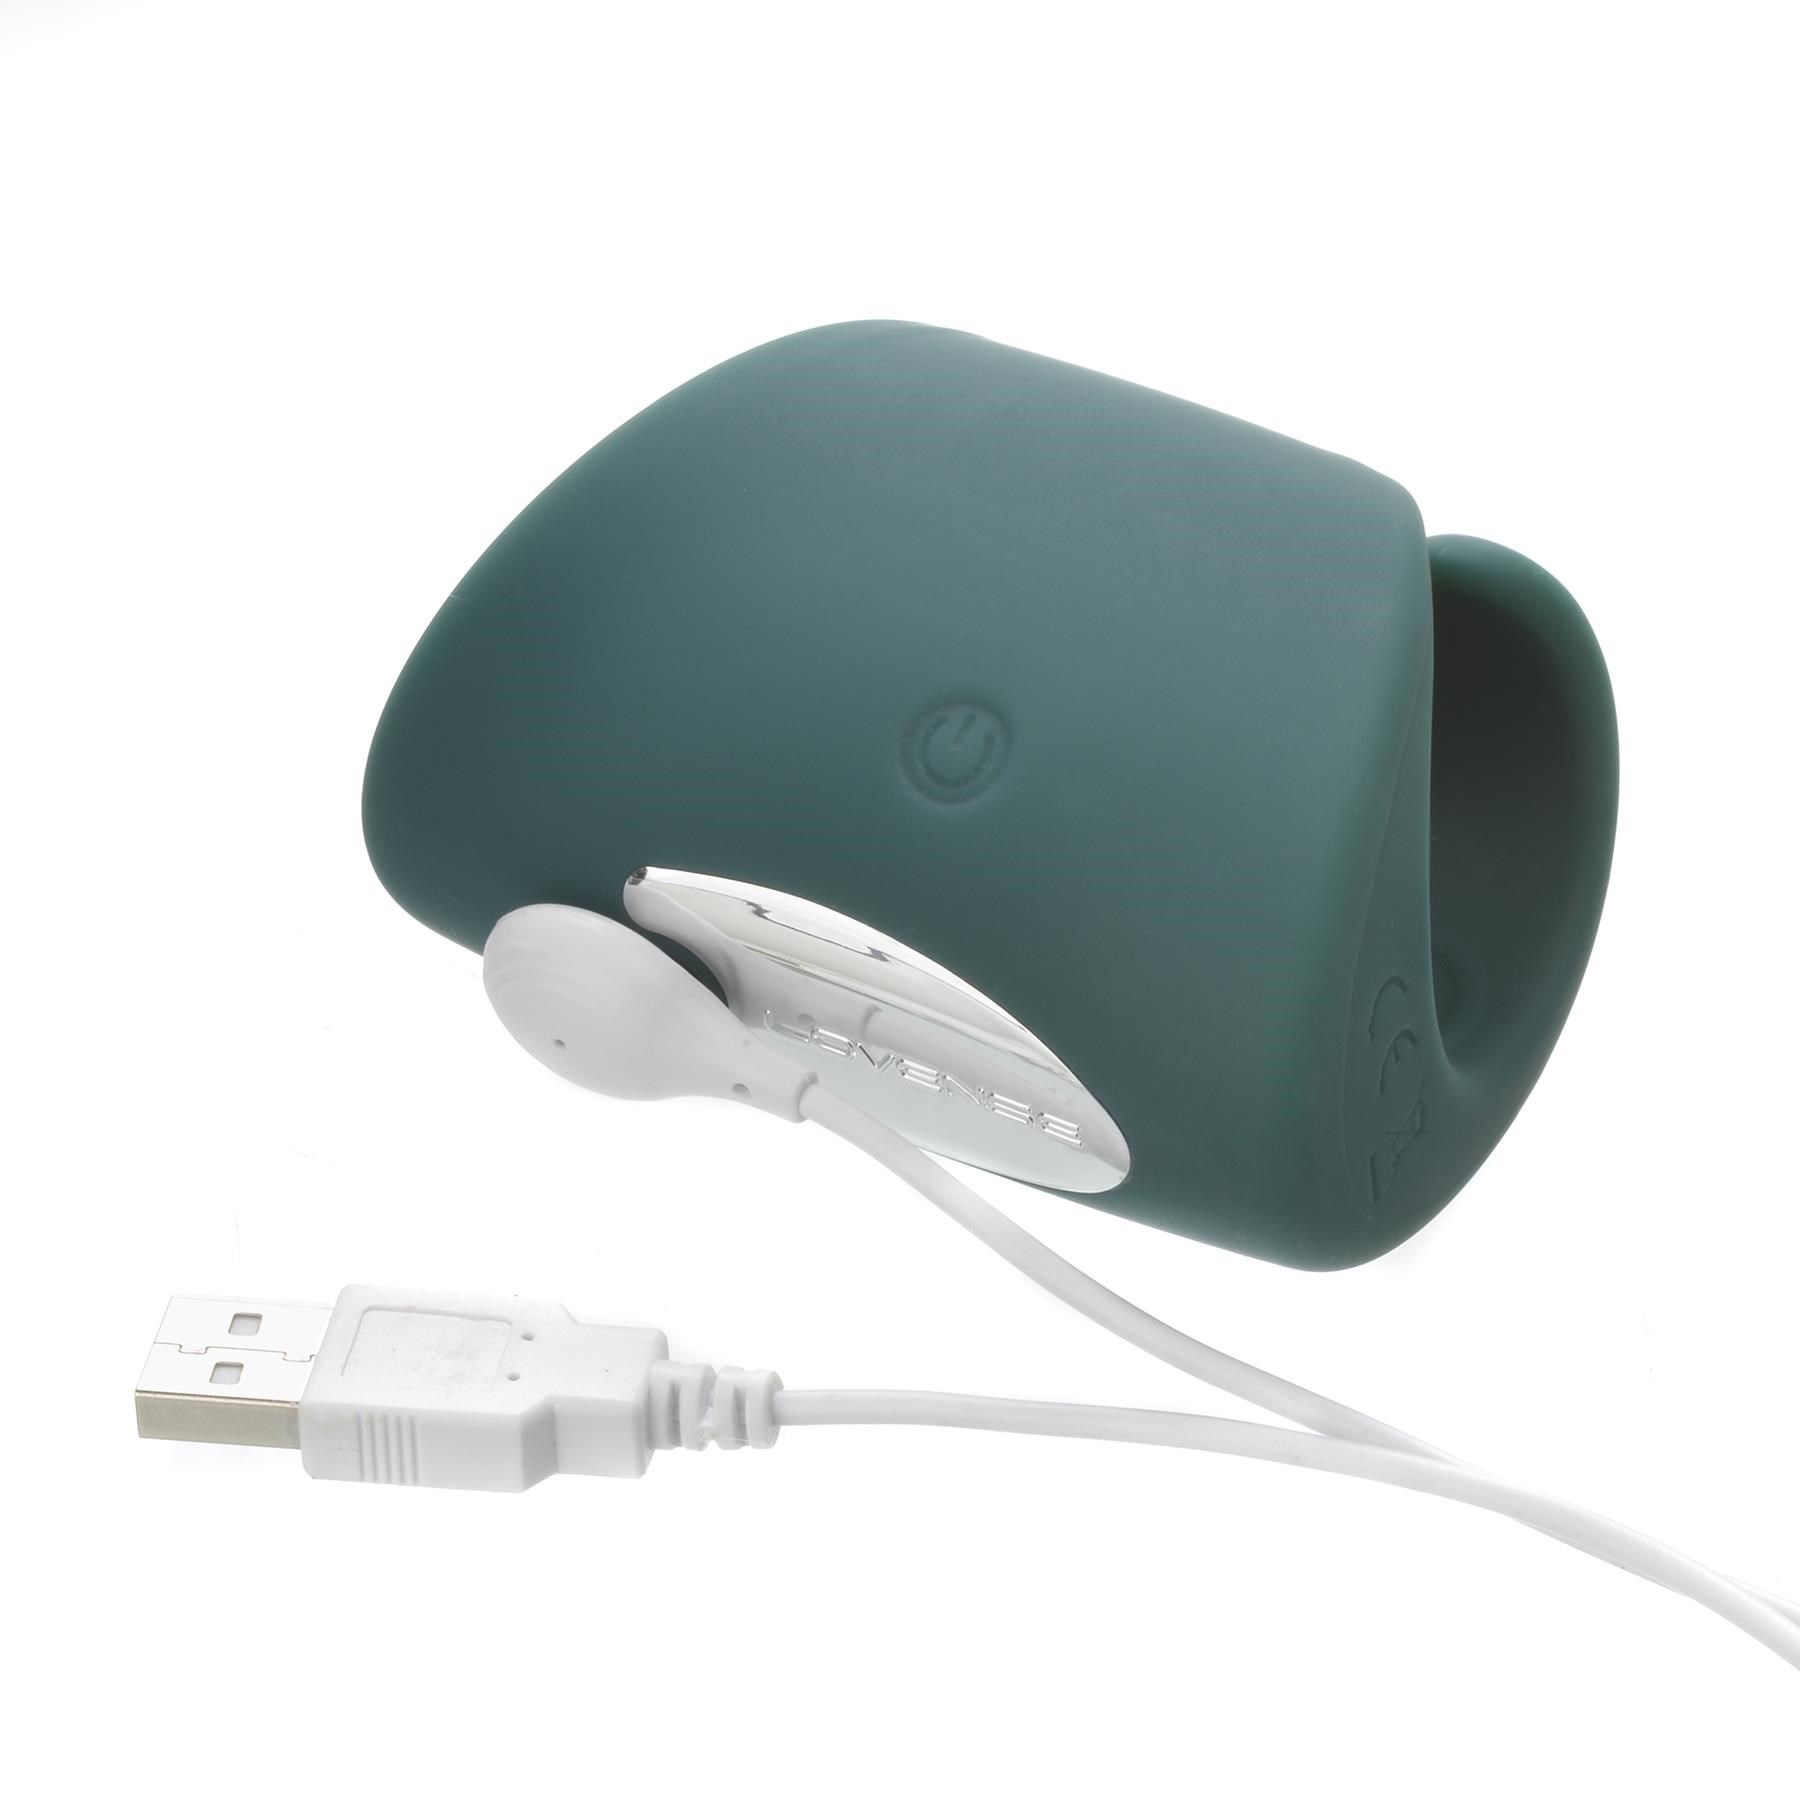 Lovense Gush Bluetooth Glans Massager- Showing Where Charging Cable is Placed